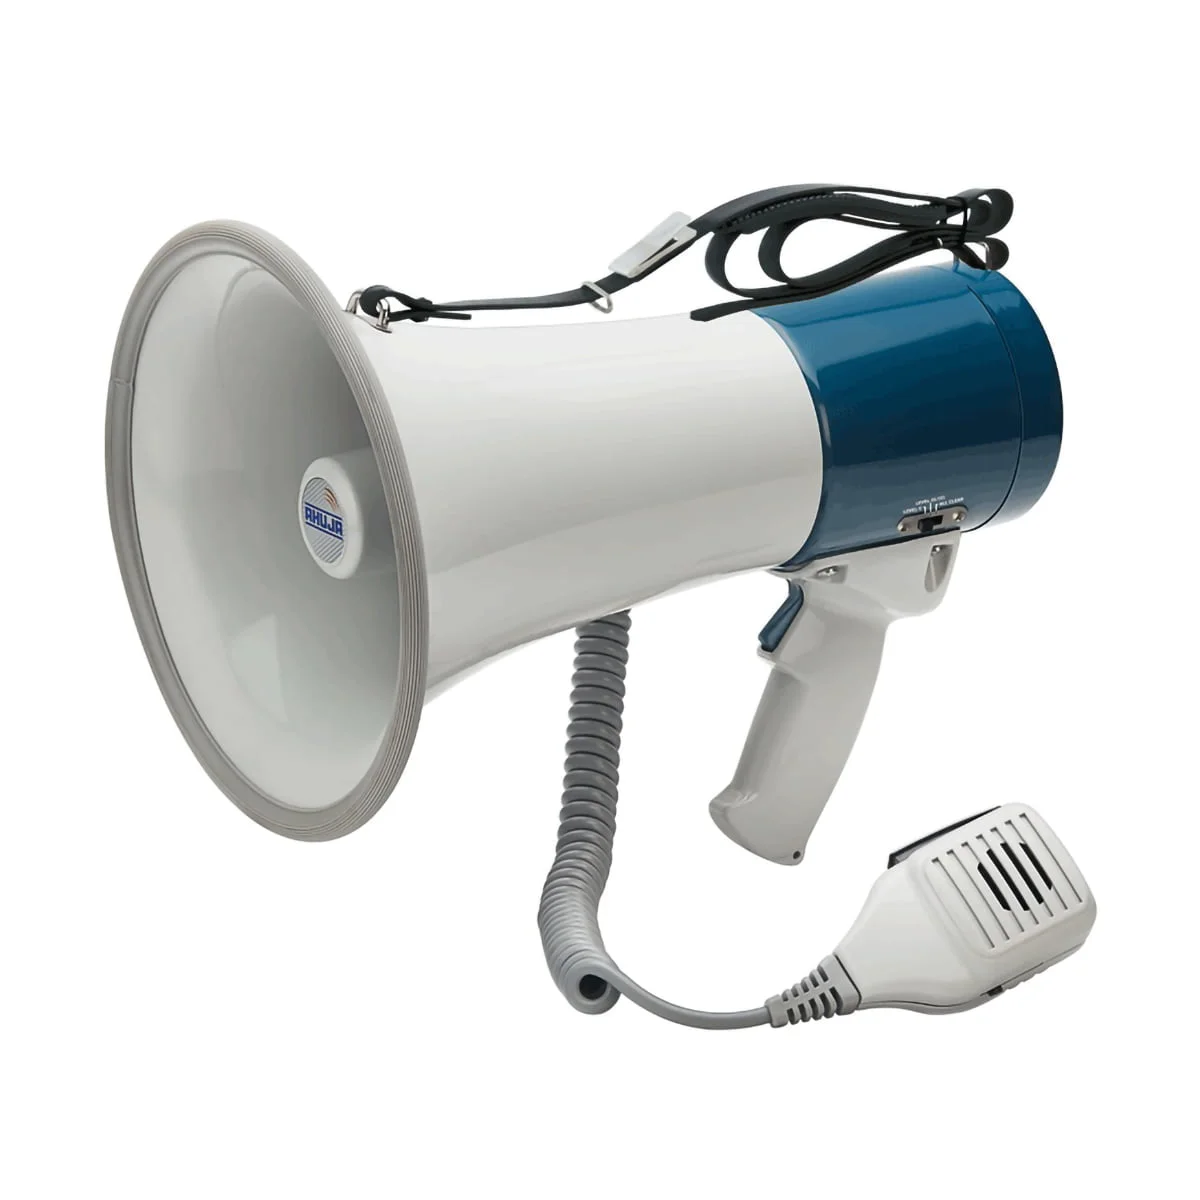 Ahuja AM-30SS Megaphone with Built-in three level siren